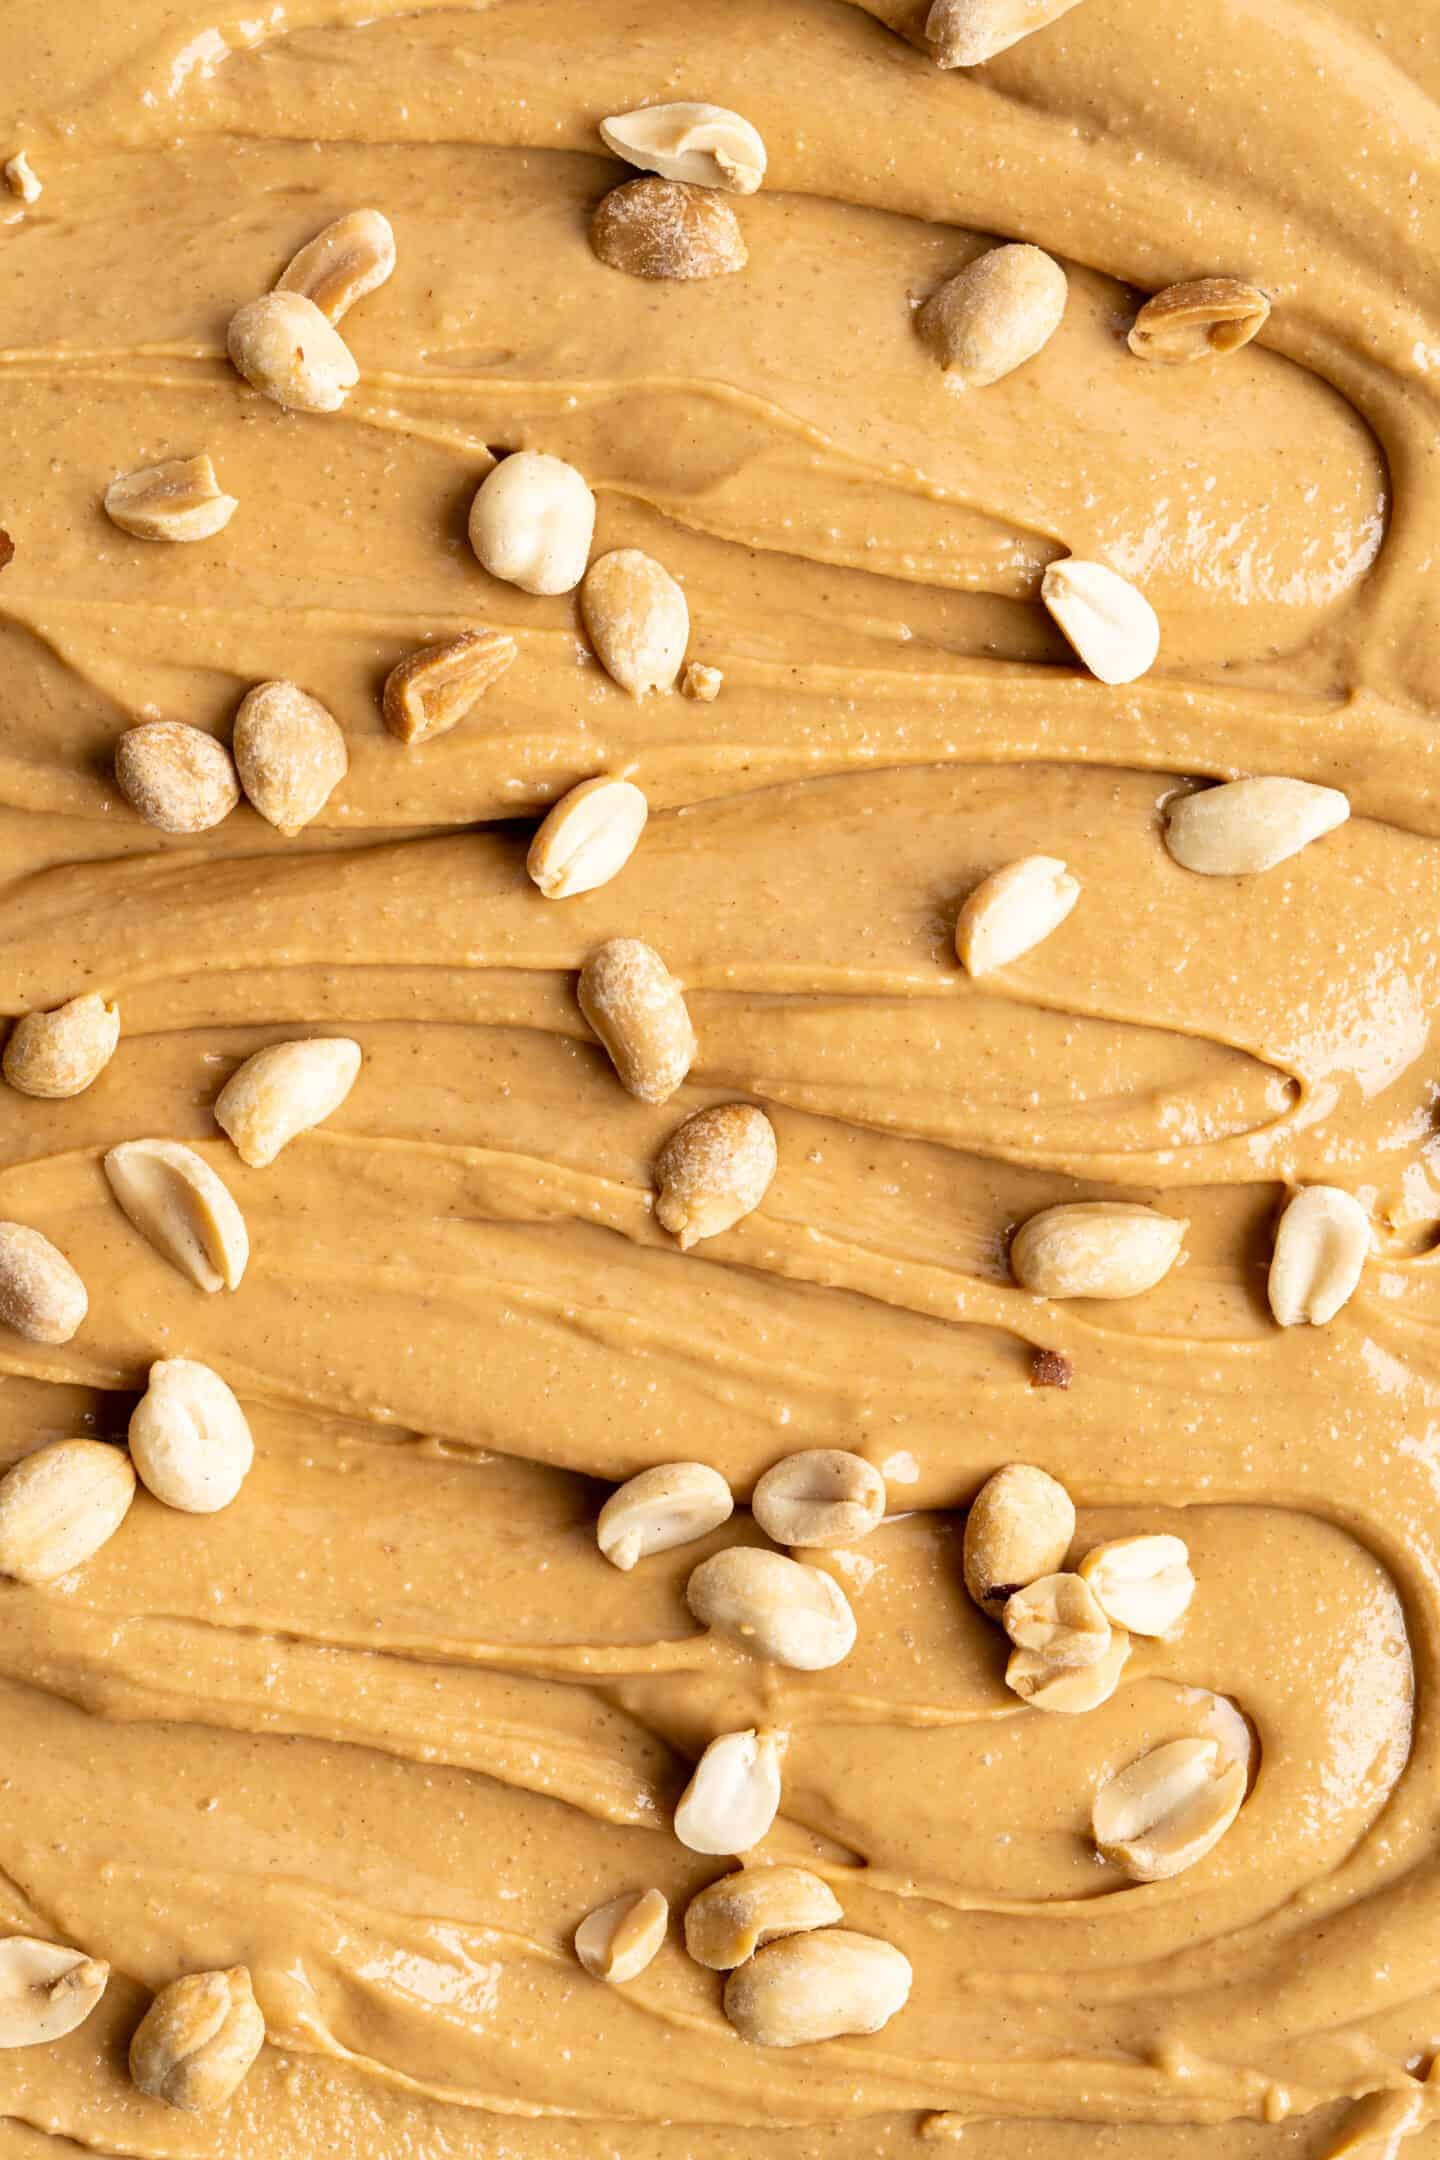 Closeup of peanut butter with peanuts sprinkled over the top